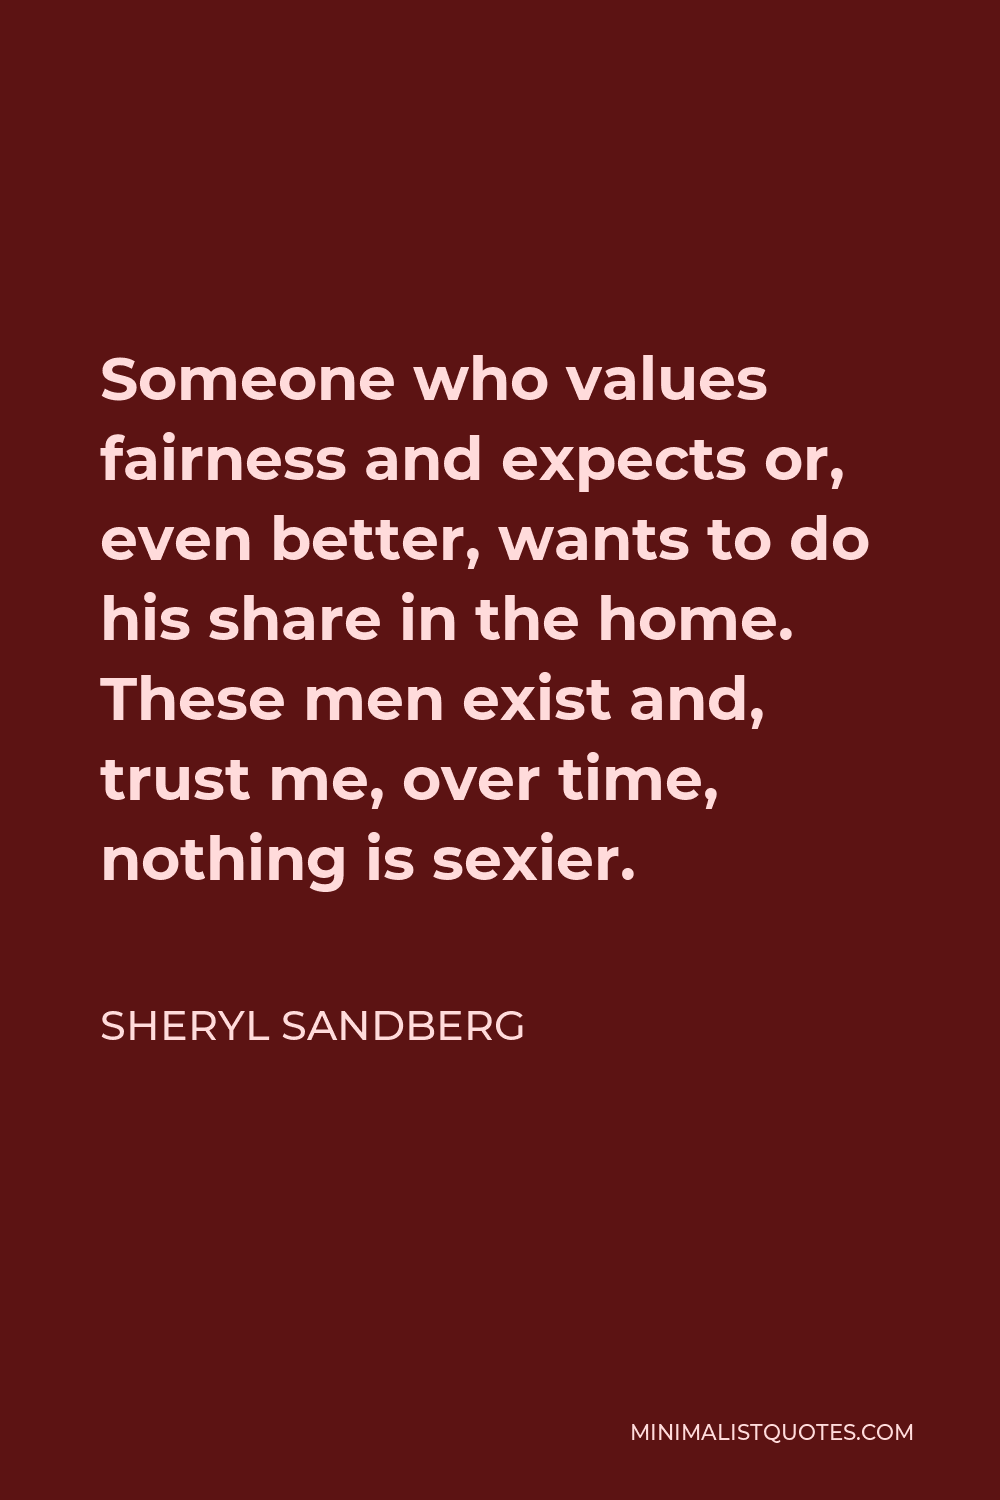 Sheryl Sandberg Quote - Someone who values fairness and expects or, even better, wants to do his share in the home. These men exist and, trust me, over time, nothing is sexier.